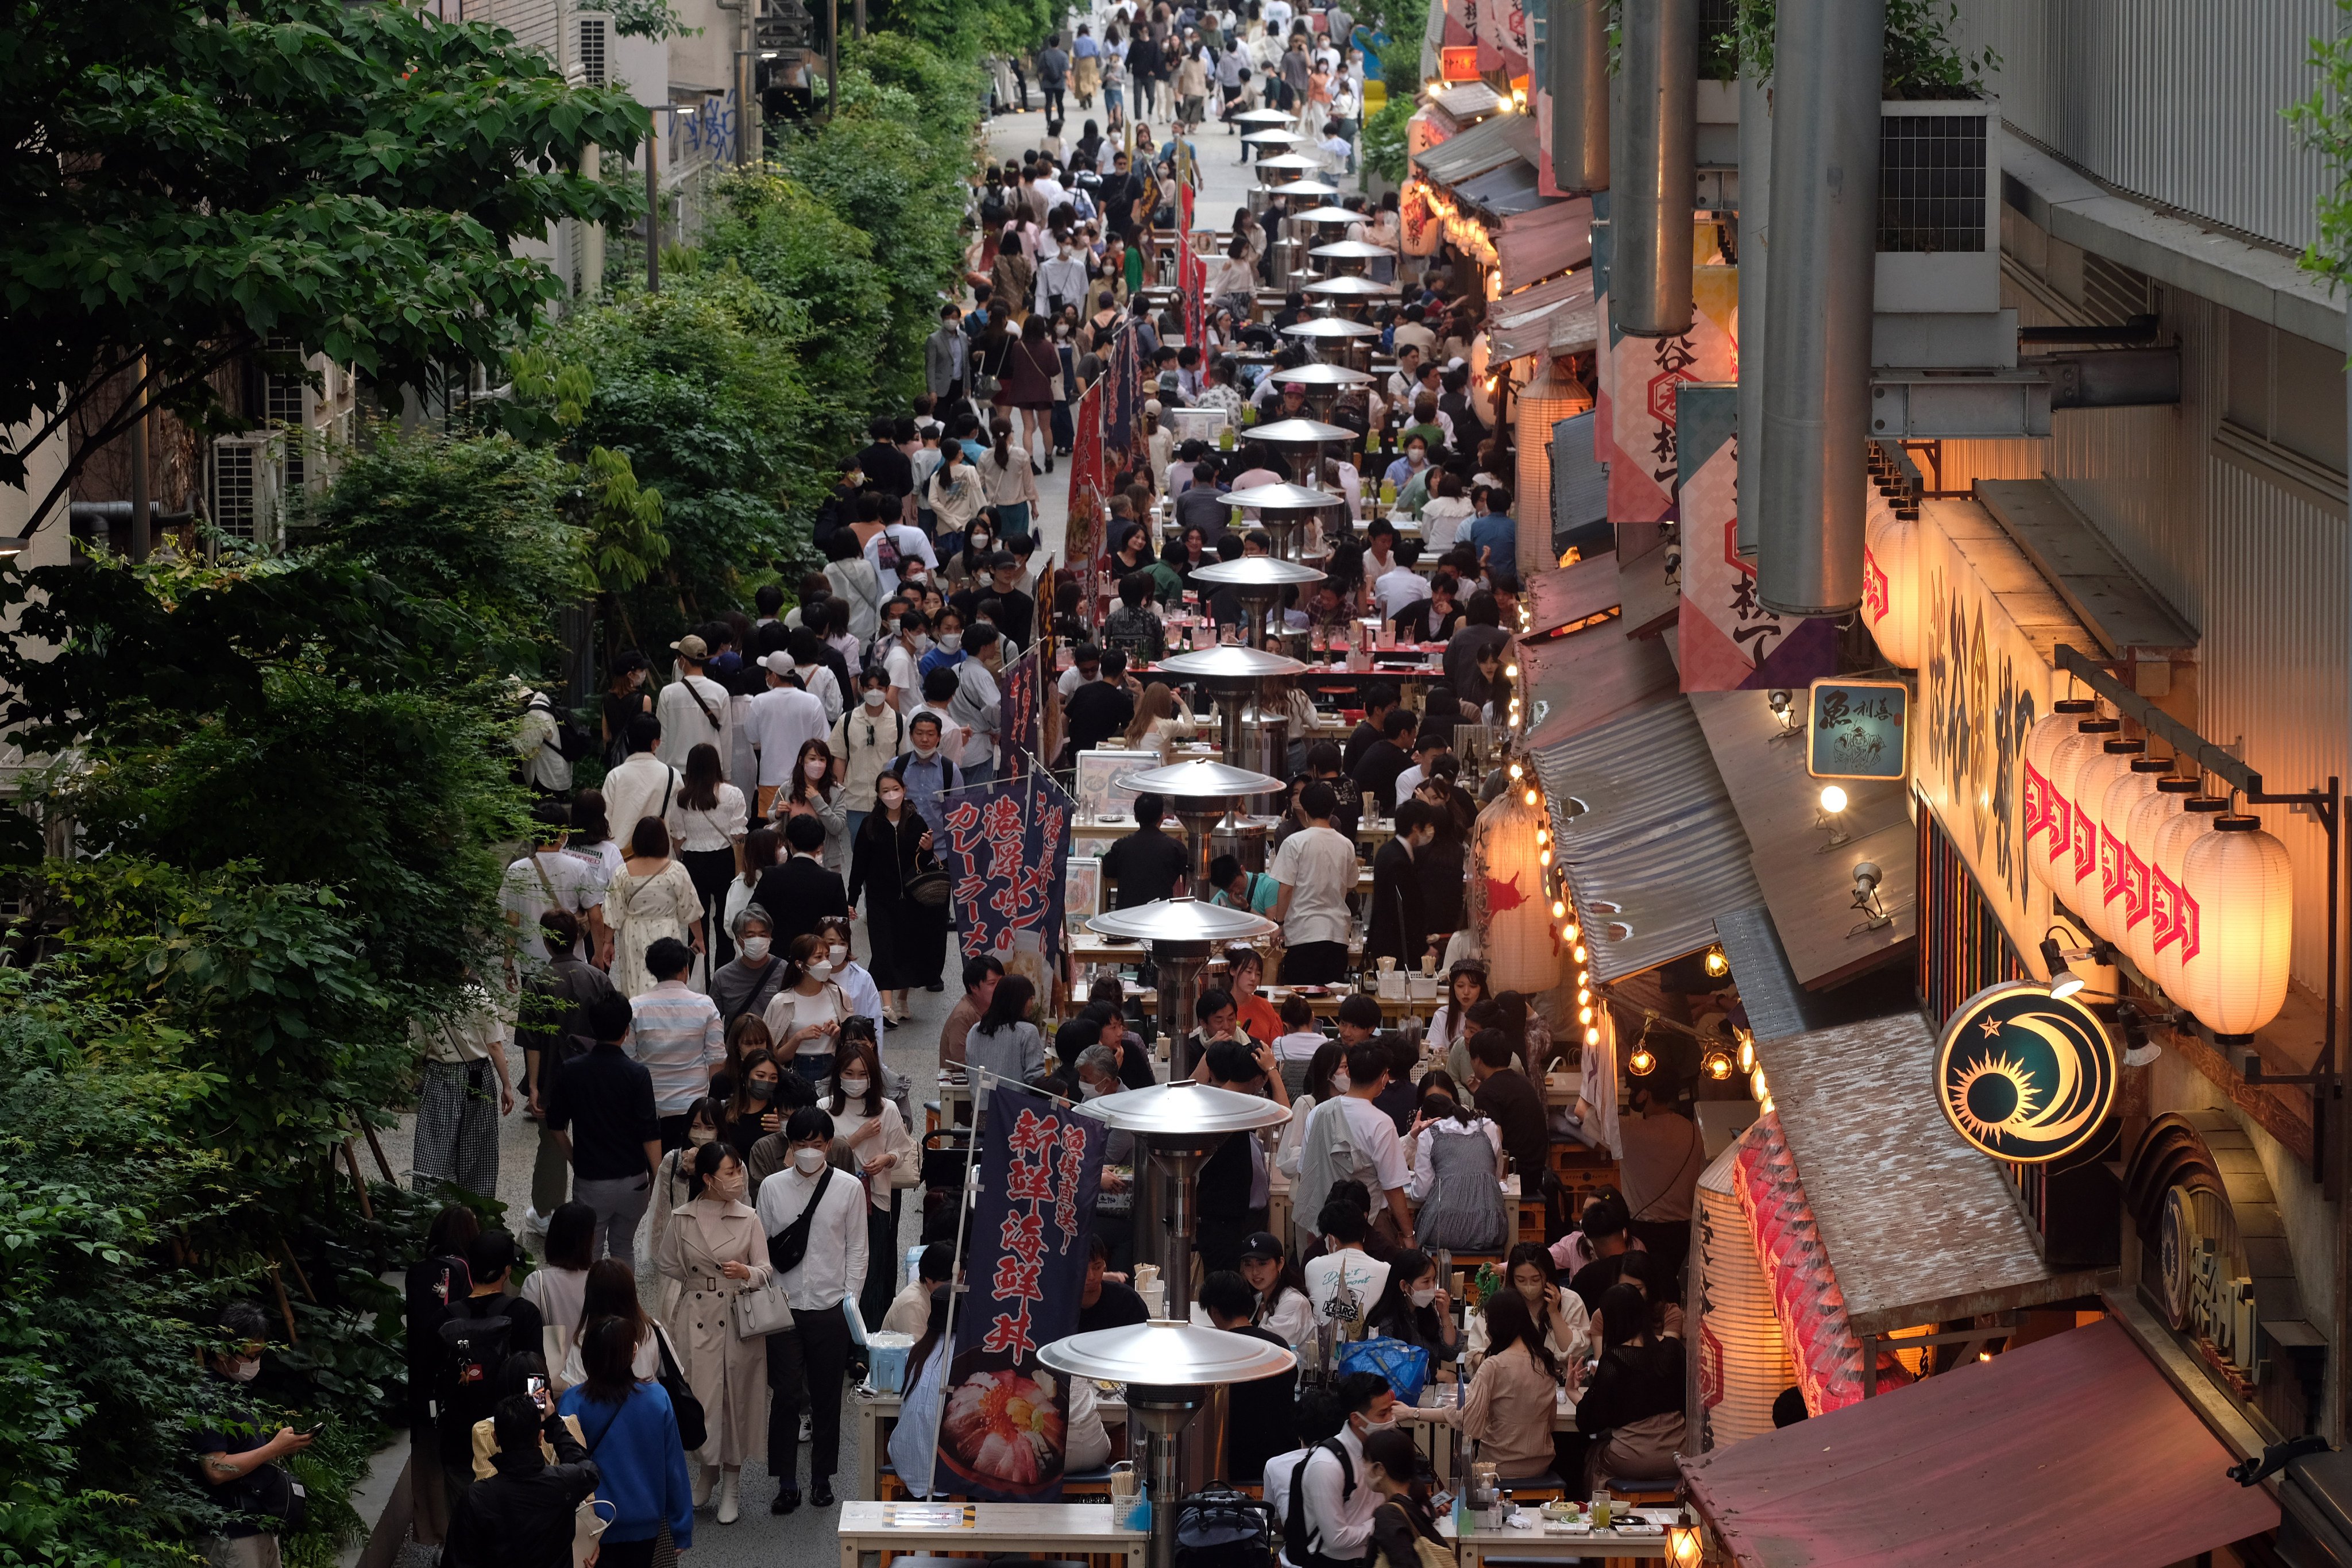 Crowds gather outside restaurants at Miyashita Park in Tokyo on May 22. Japan has so far been reluctant to make drastic changes to its monetary policy to avoid causing market volatility. Photo: Bloomberg